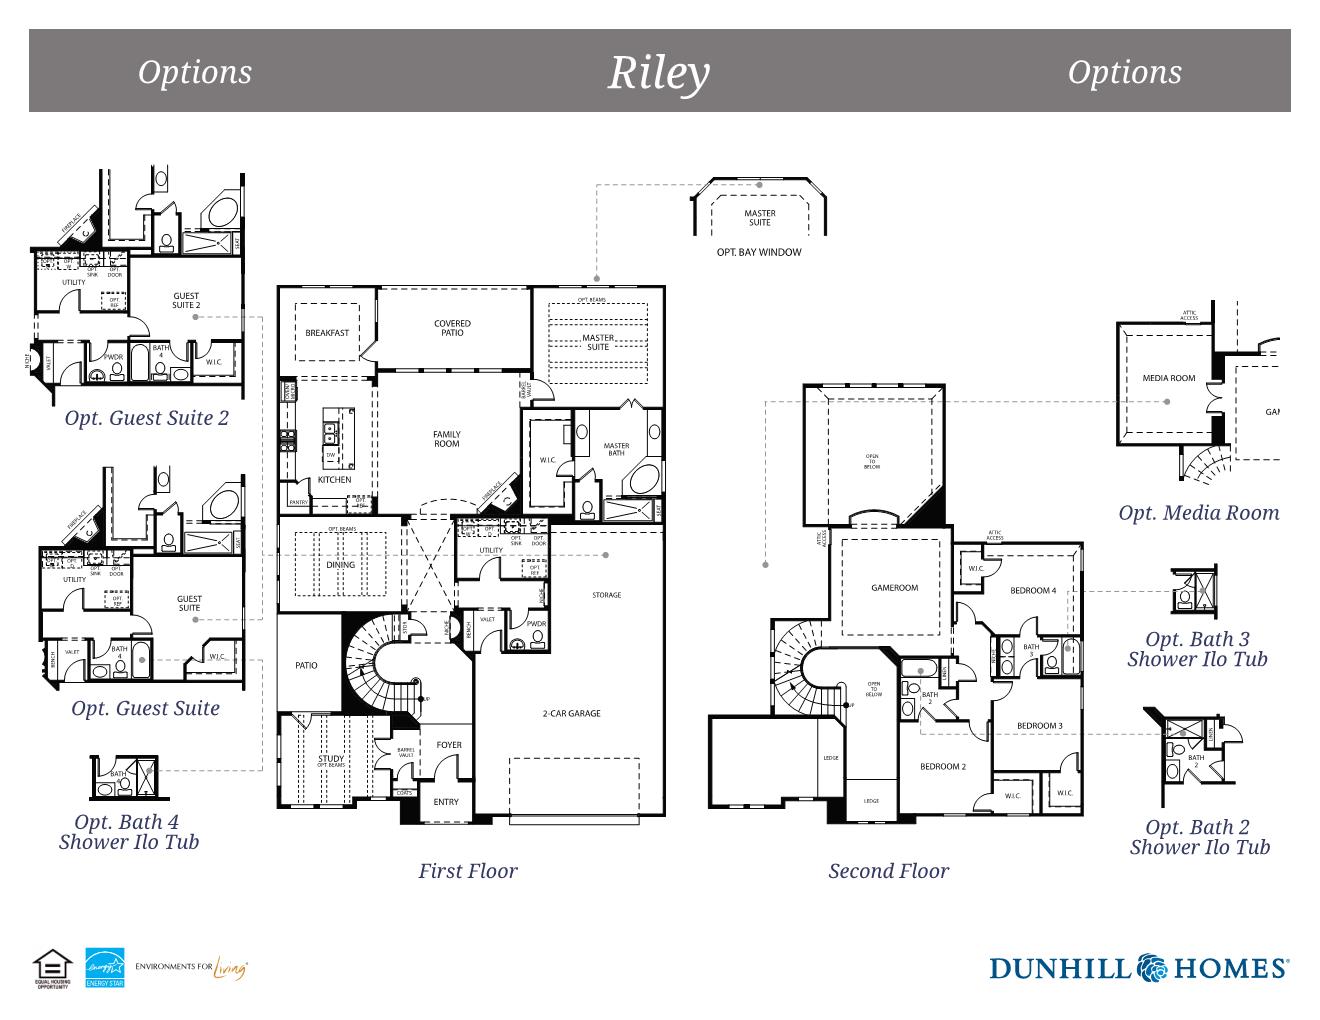 Riley by Dunhill Homes Floor Plan Friday Marr Team at